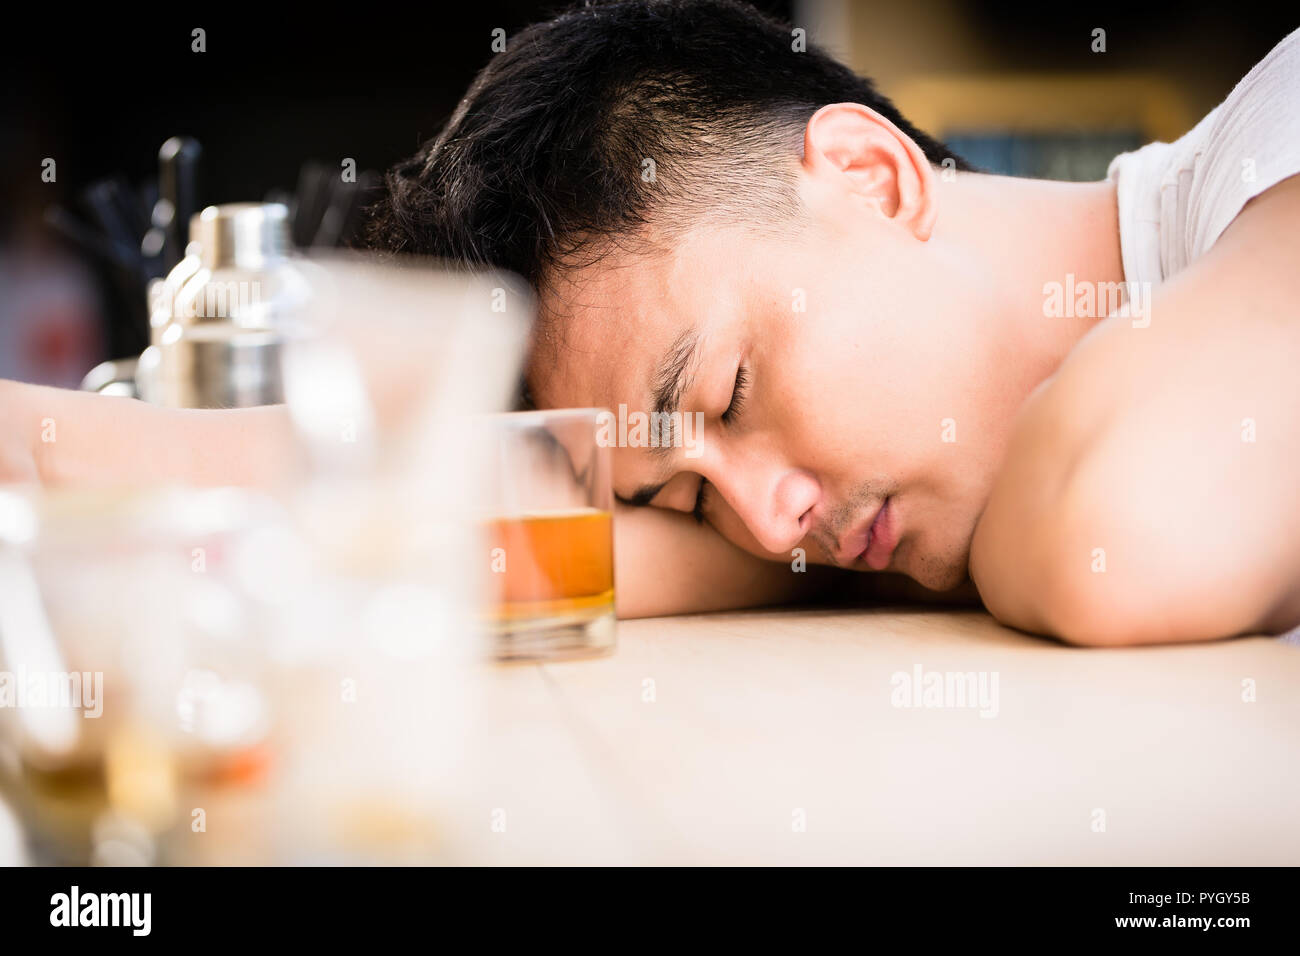 Drunk man with whiskey glass Stock Photo